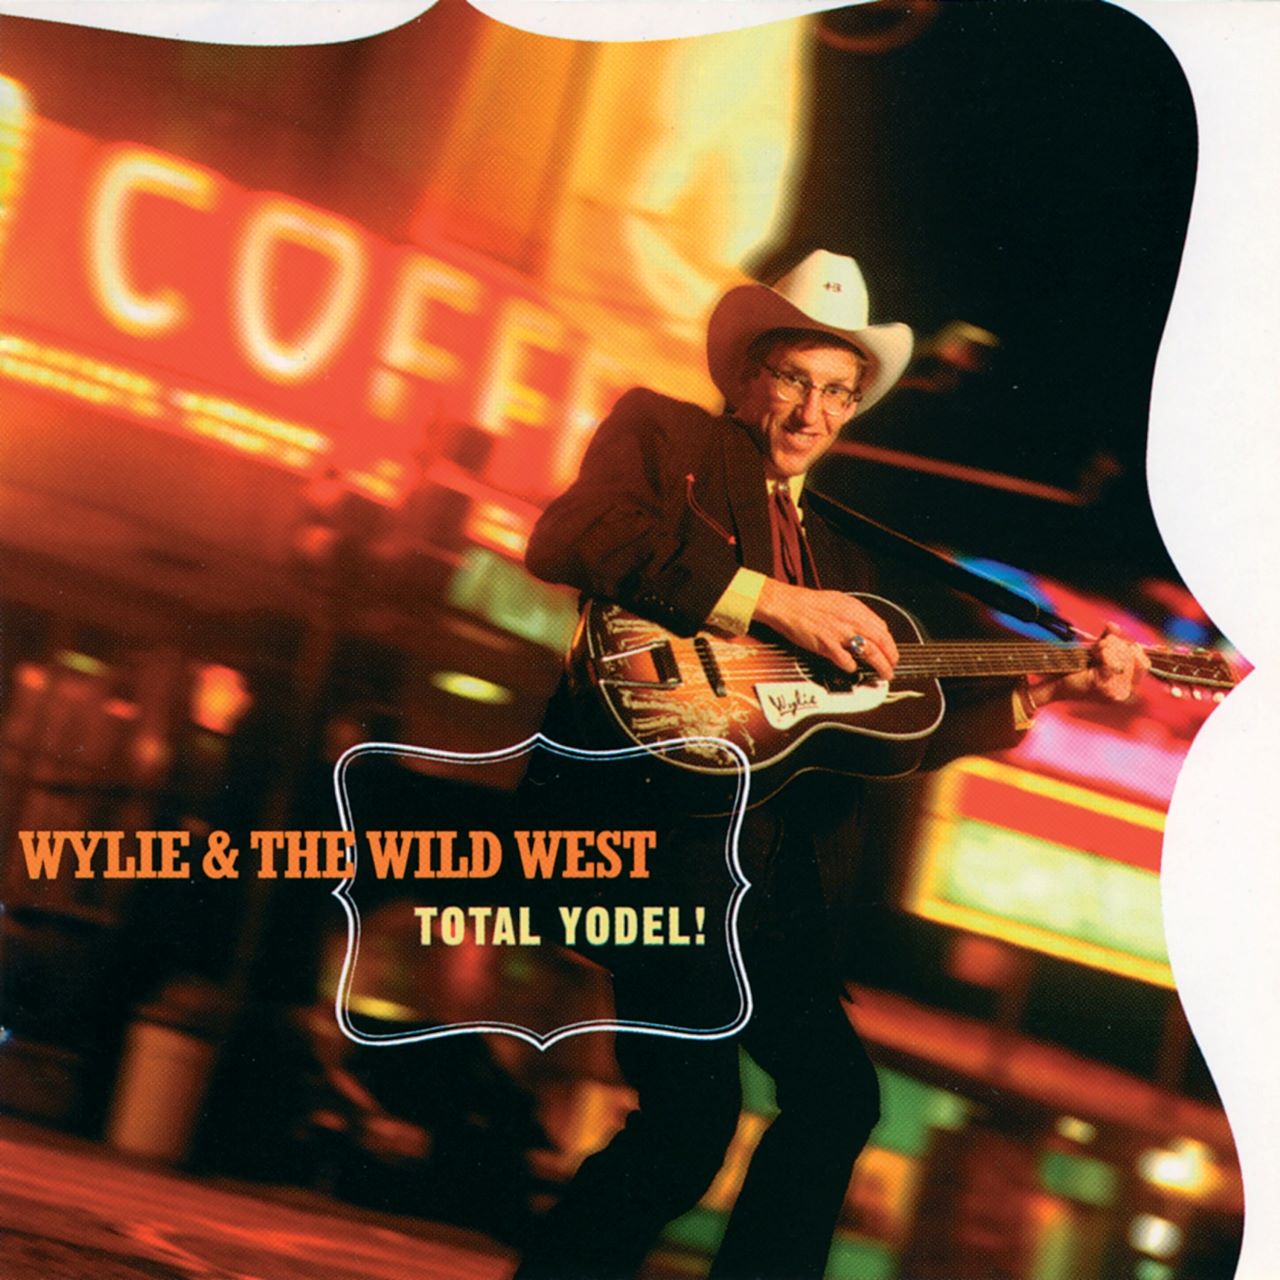 Wylie & The Wild West - Total Yodel cover album